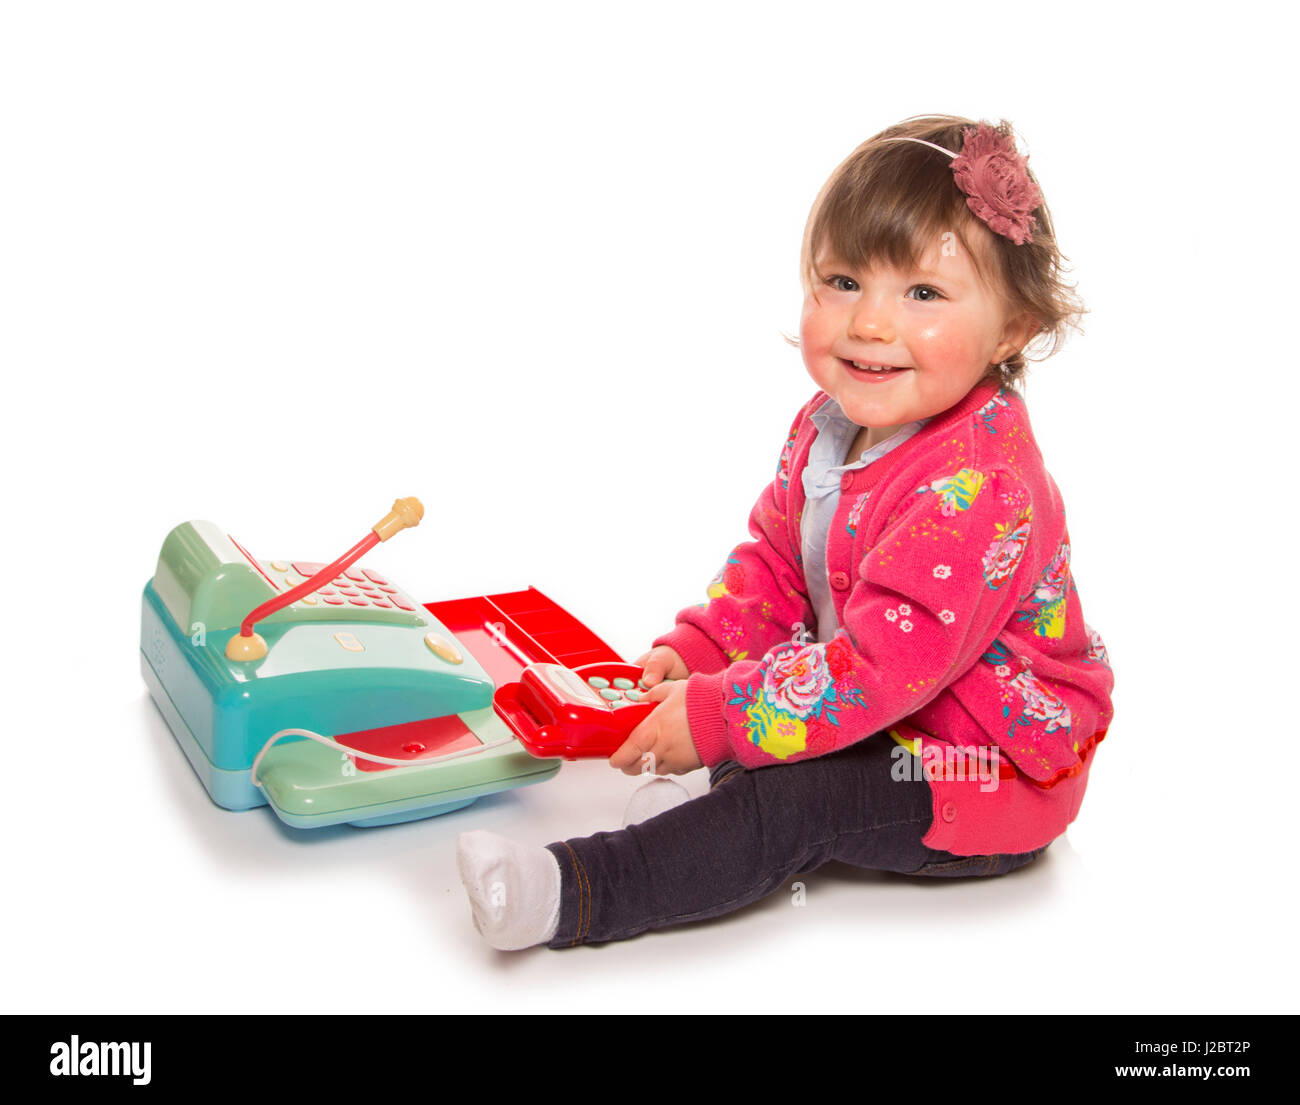 Toddler playing with a cash register in a studio Stock Photo